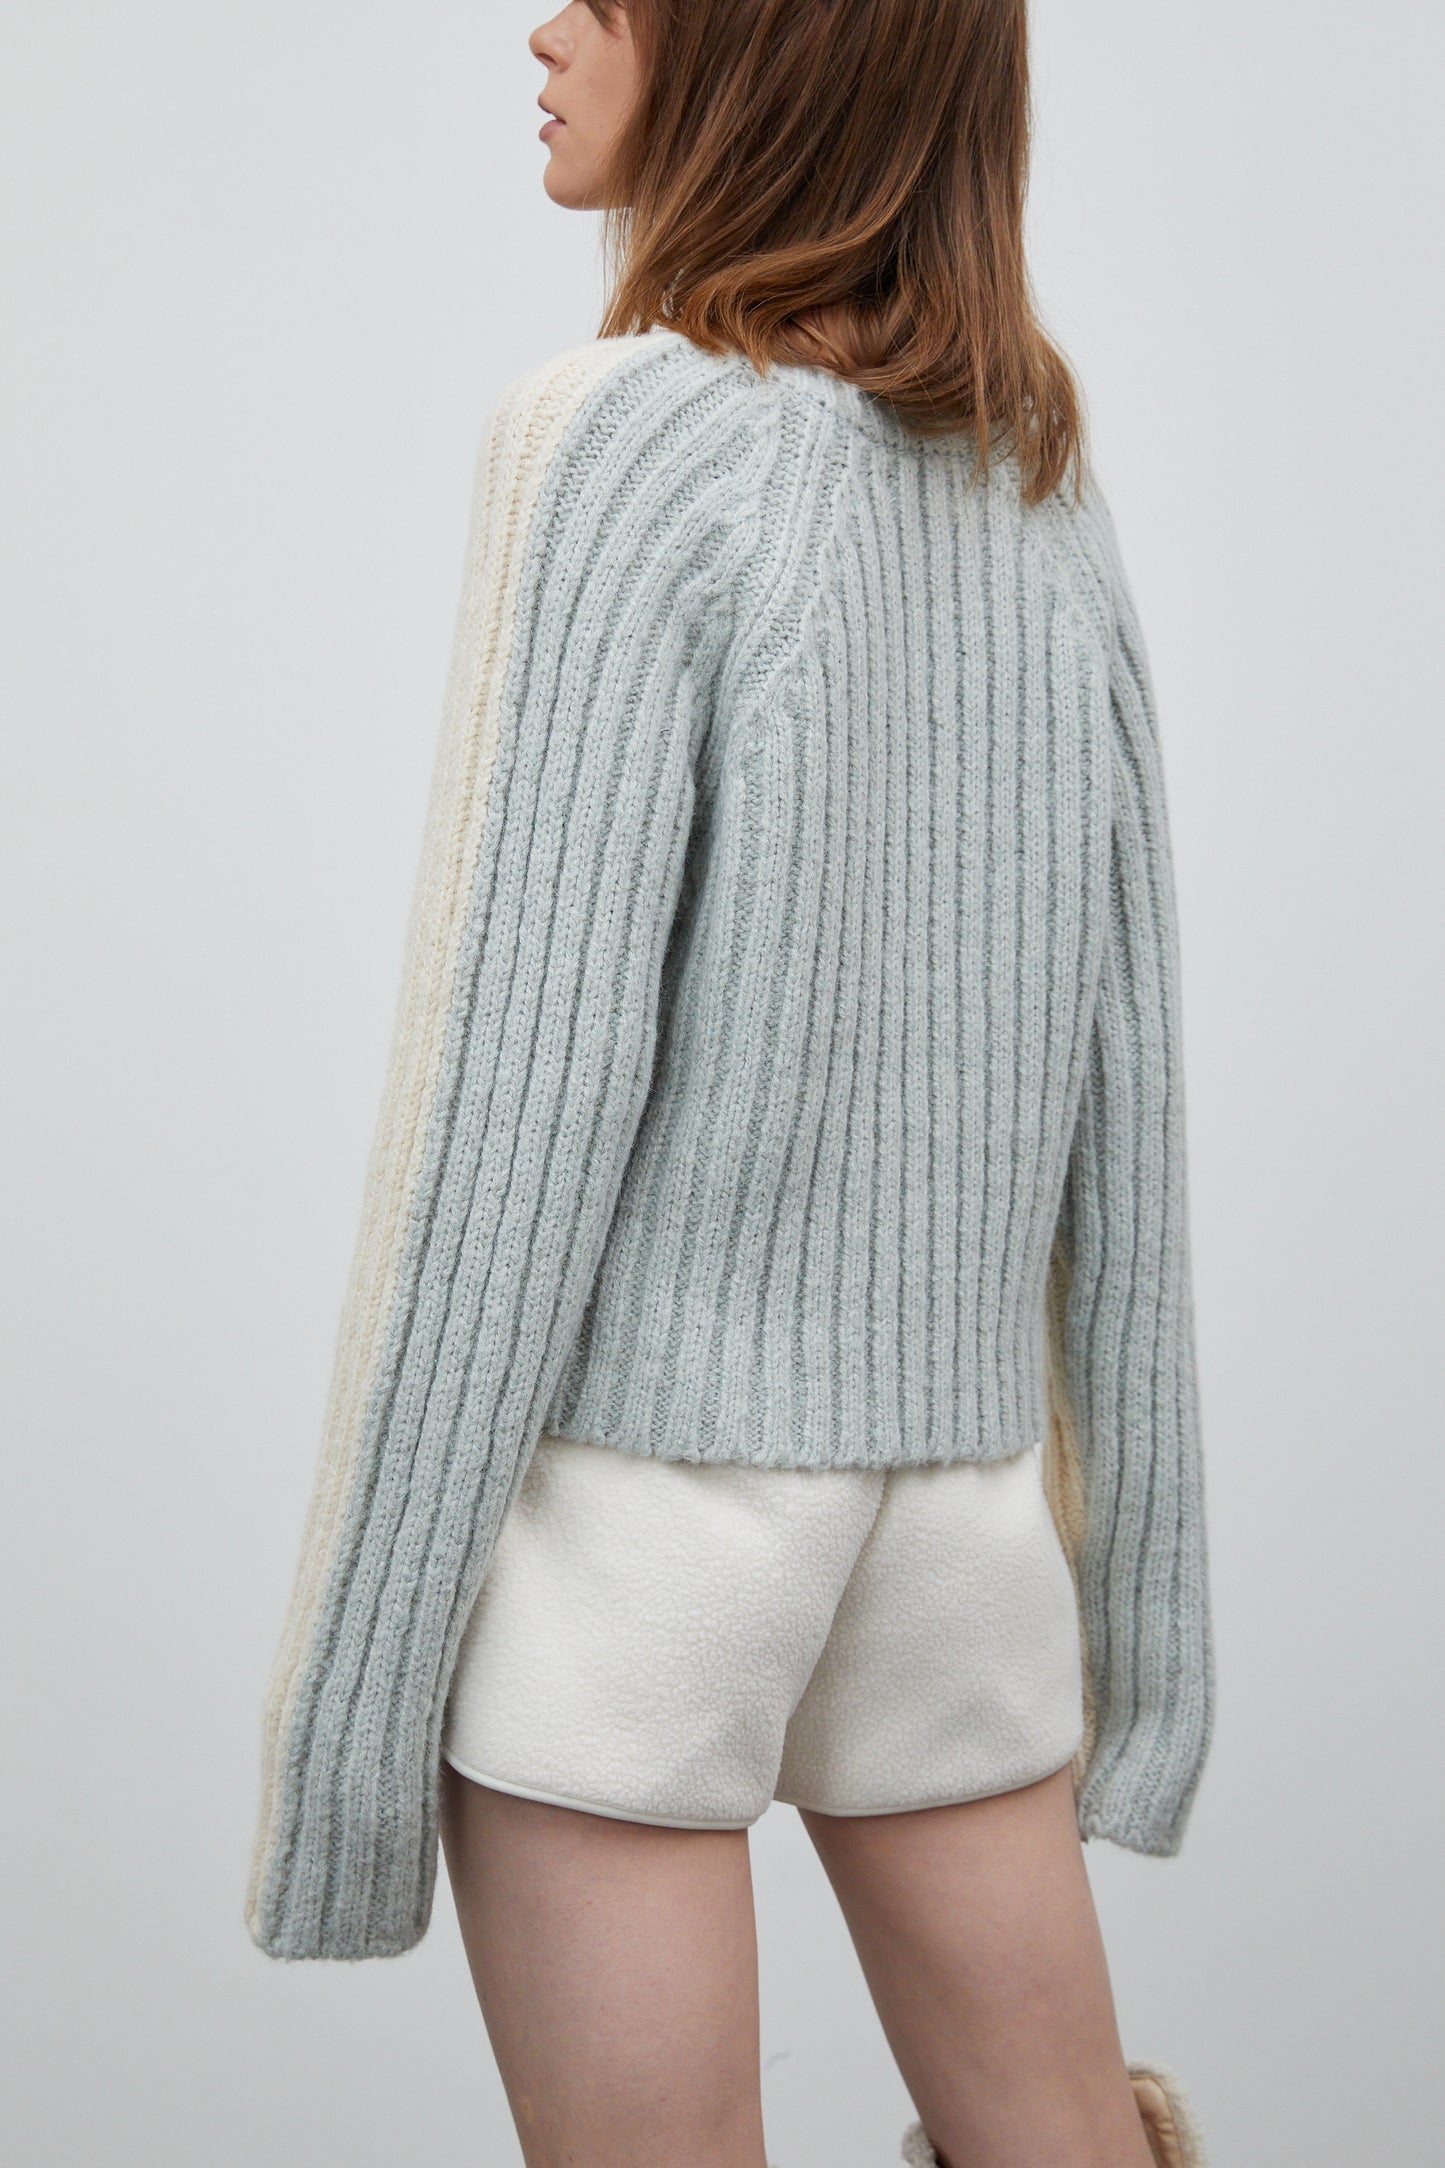 Cut-Out Bicolor Ribbed Sweater, Cream & Blue